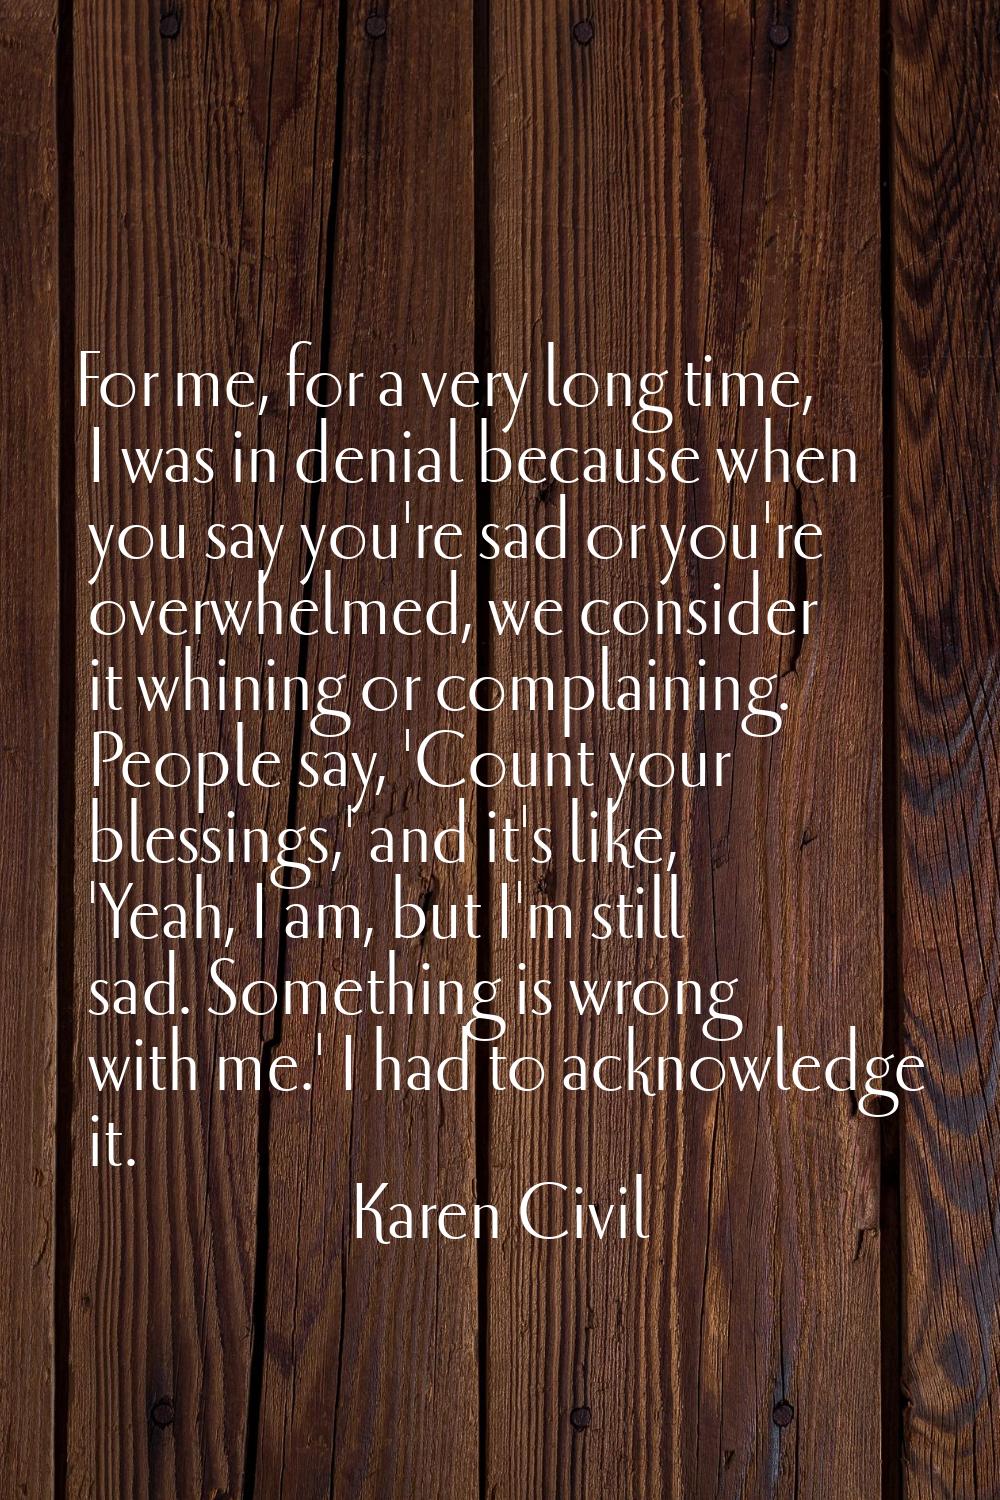 For me, for a very long time, I was in denial because when you say you're sad or you're overwhelmed